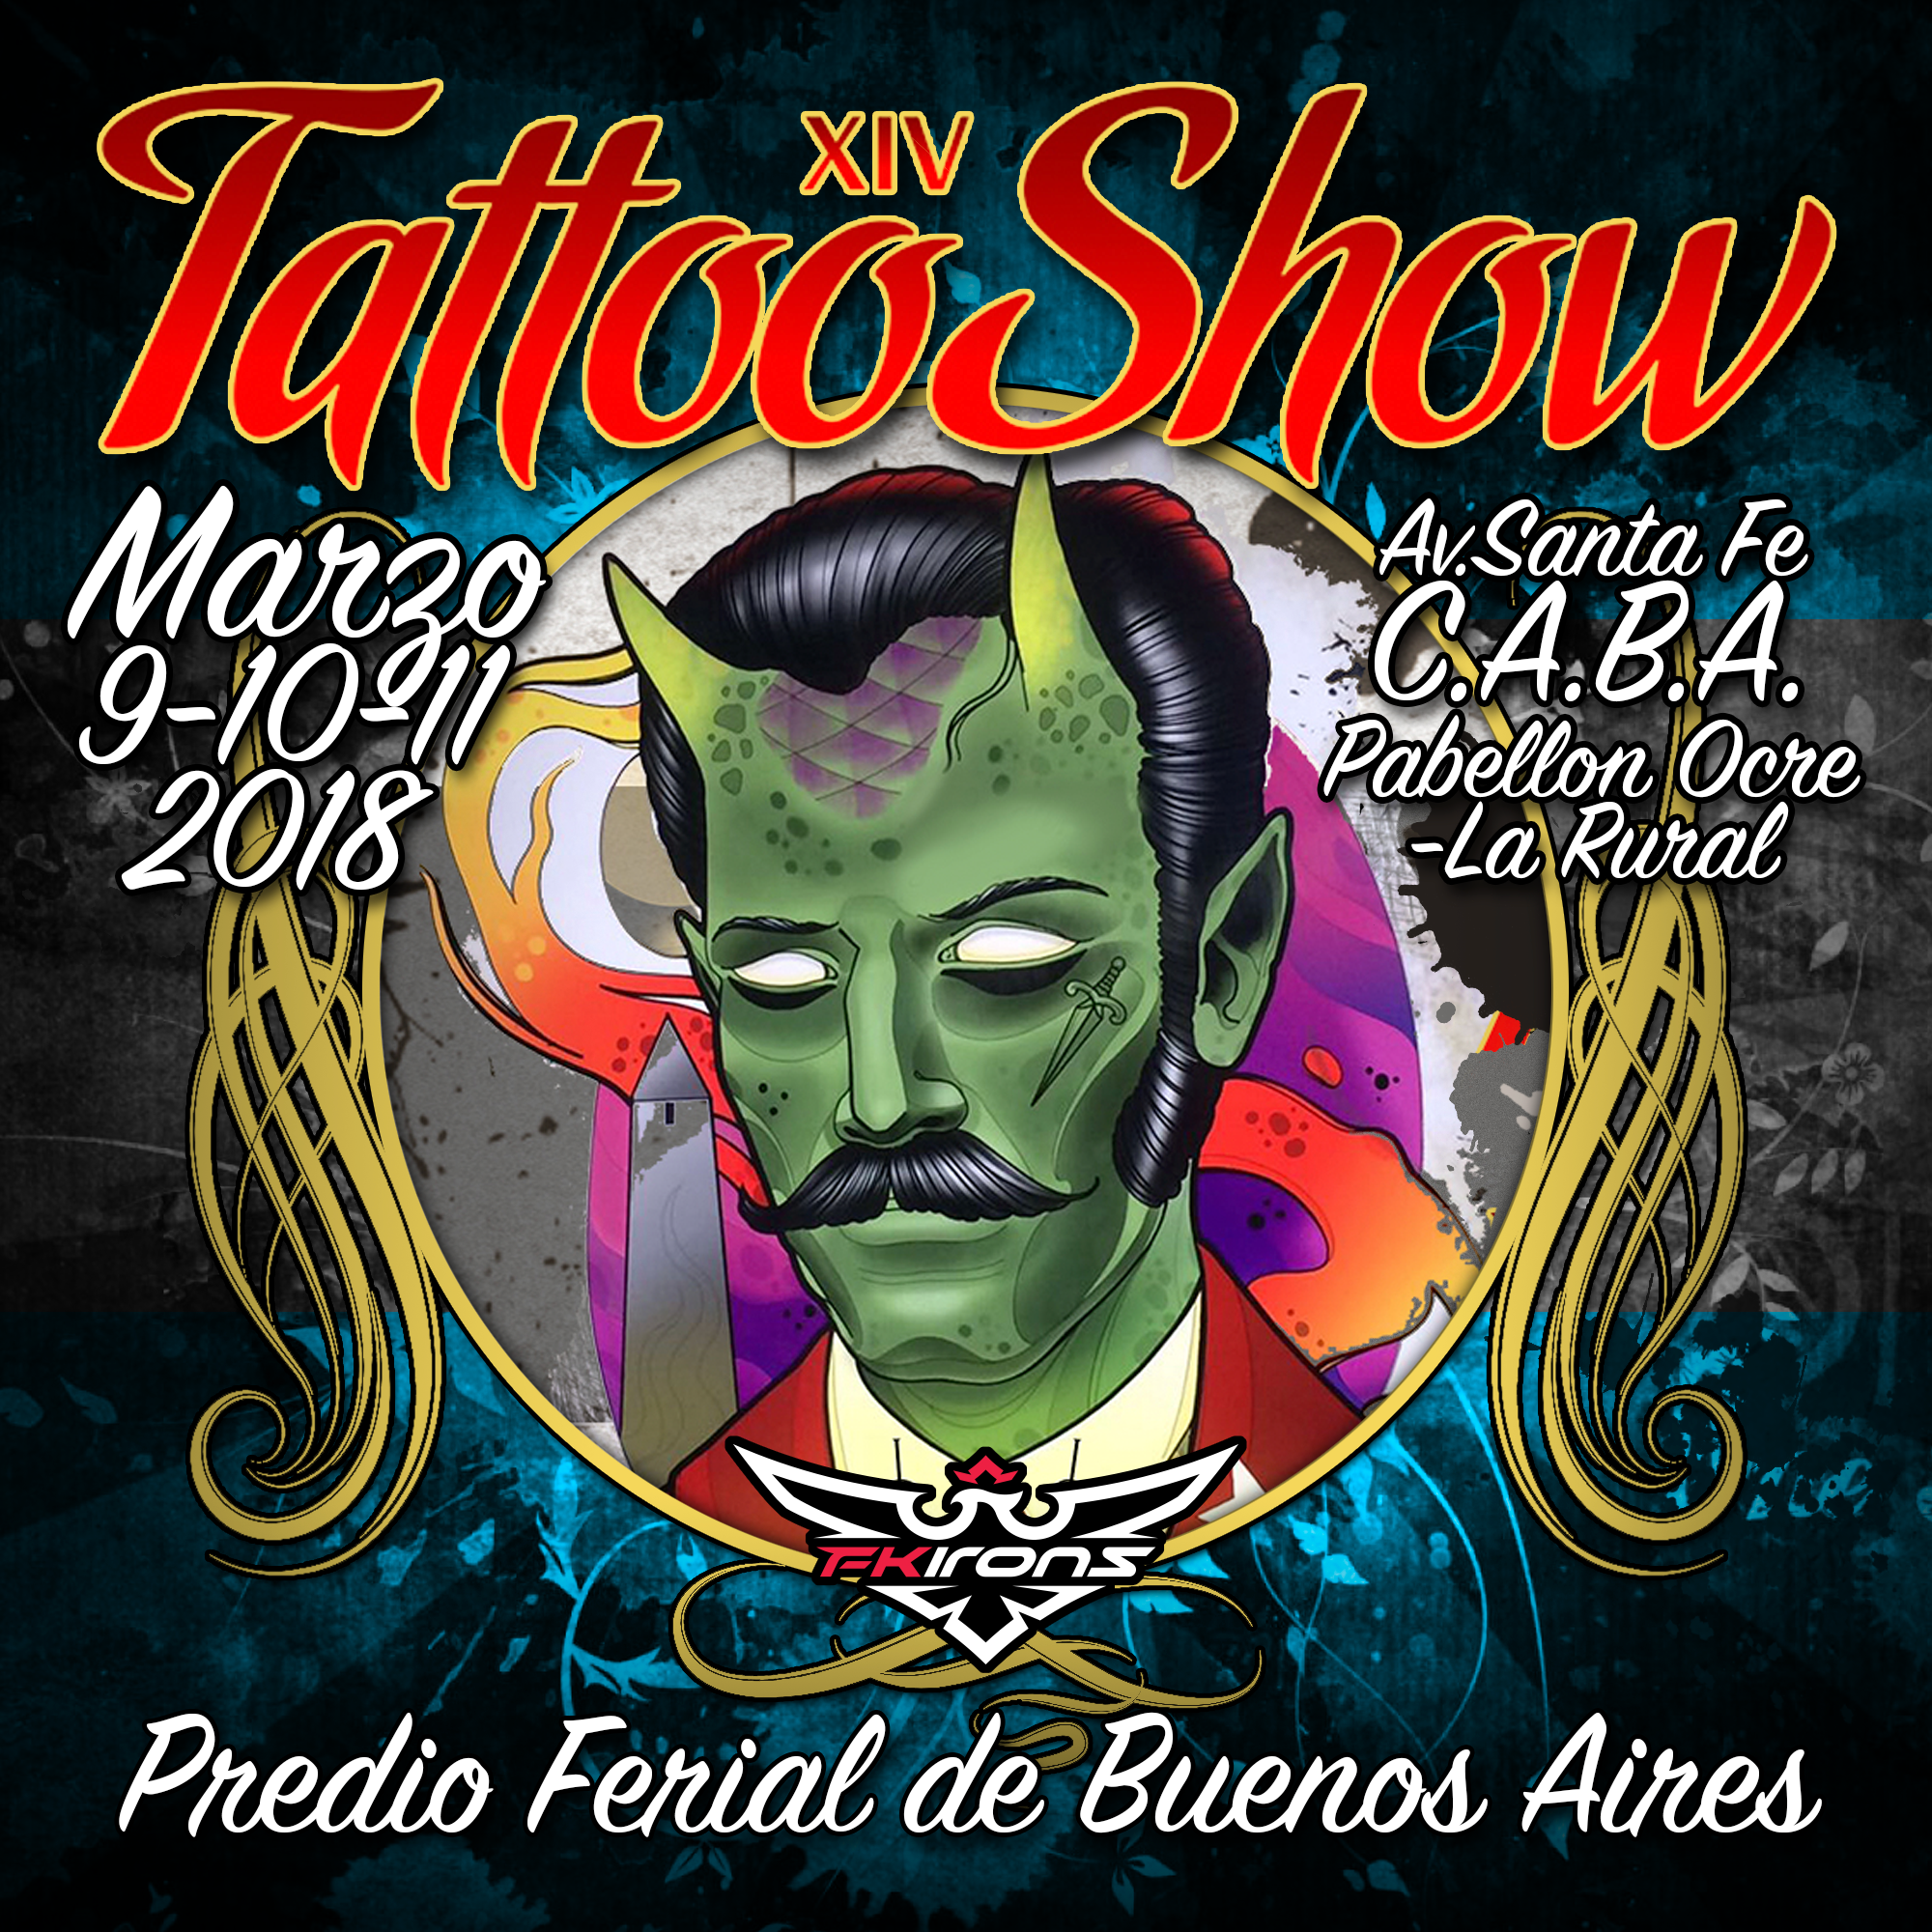 XIV Tattoo Show Buenos Aires, Argentina